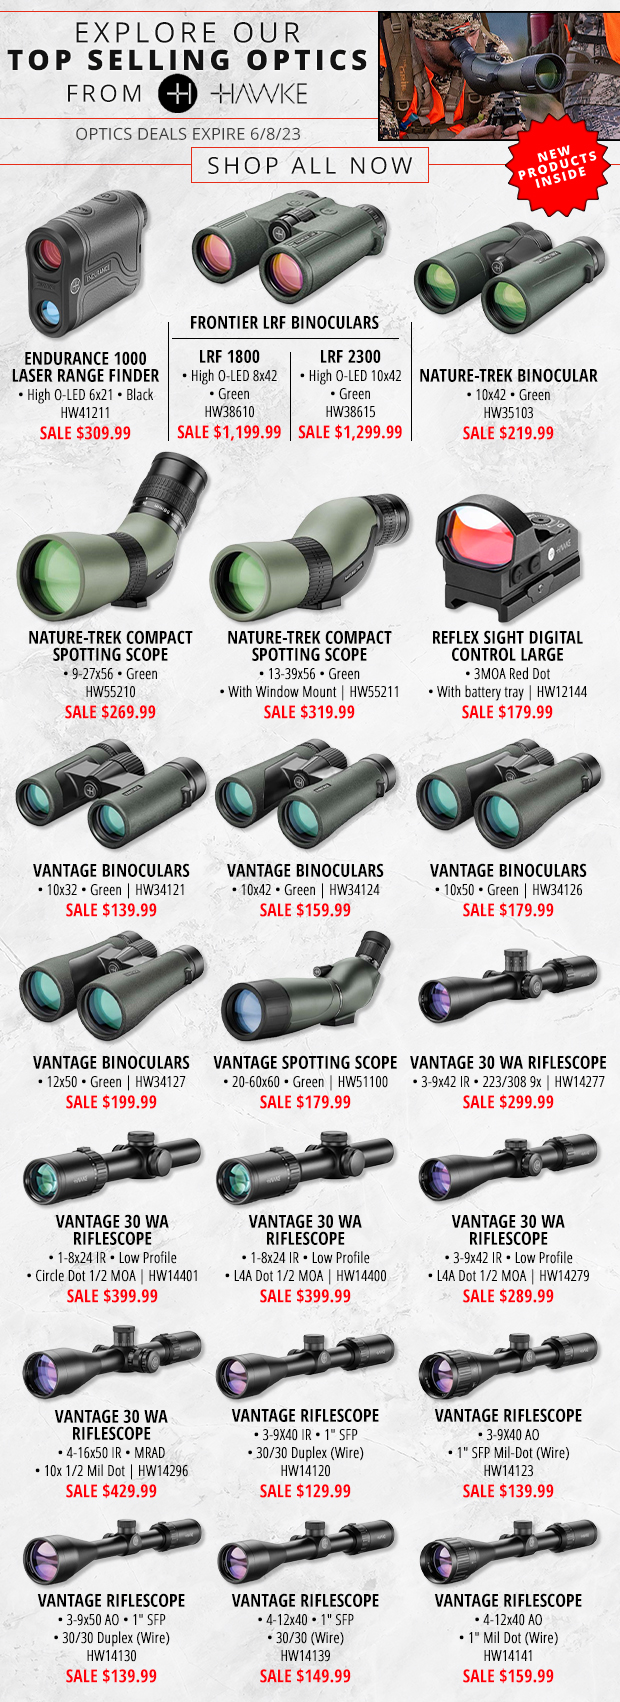 Explore Our Top Selling Optics